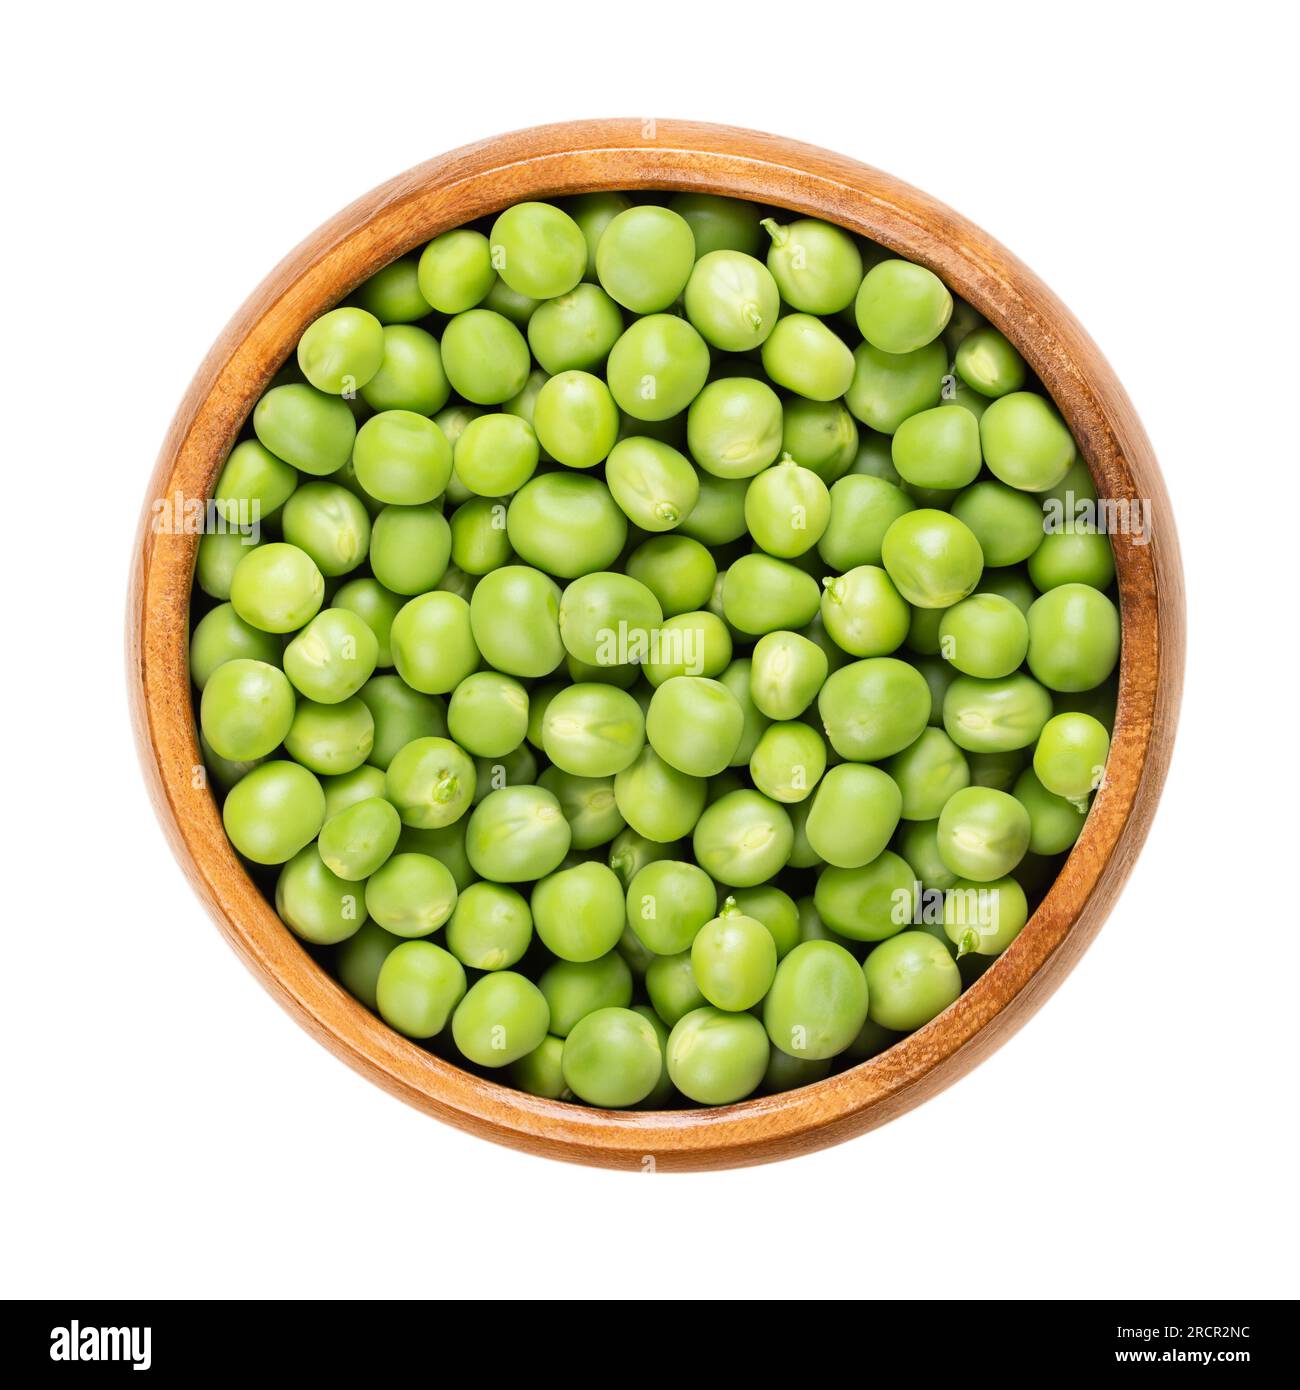 Fresh green peas, in a wooden bowl. Raw, small spherical seeds of the pod fruit Pisum sativum of greenish and yellowish color, mostly used for soups. Stock Photo